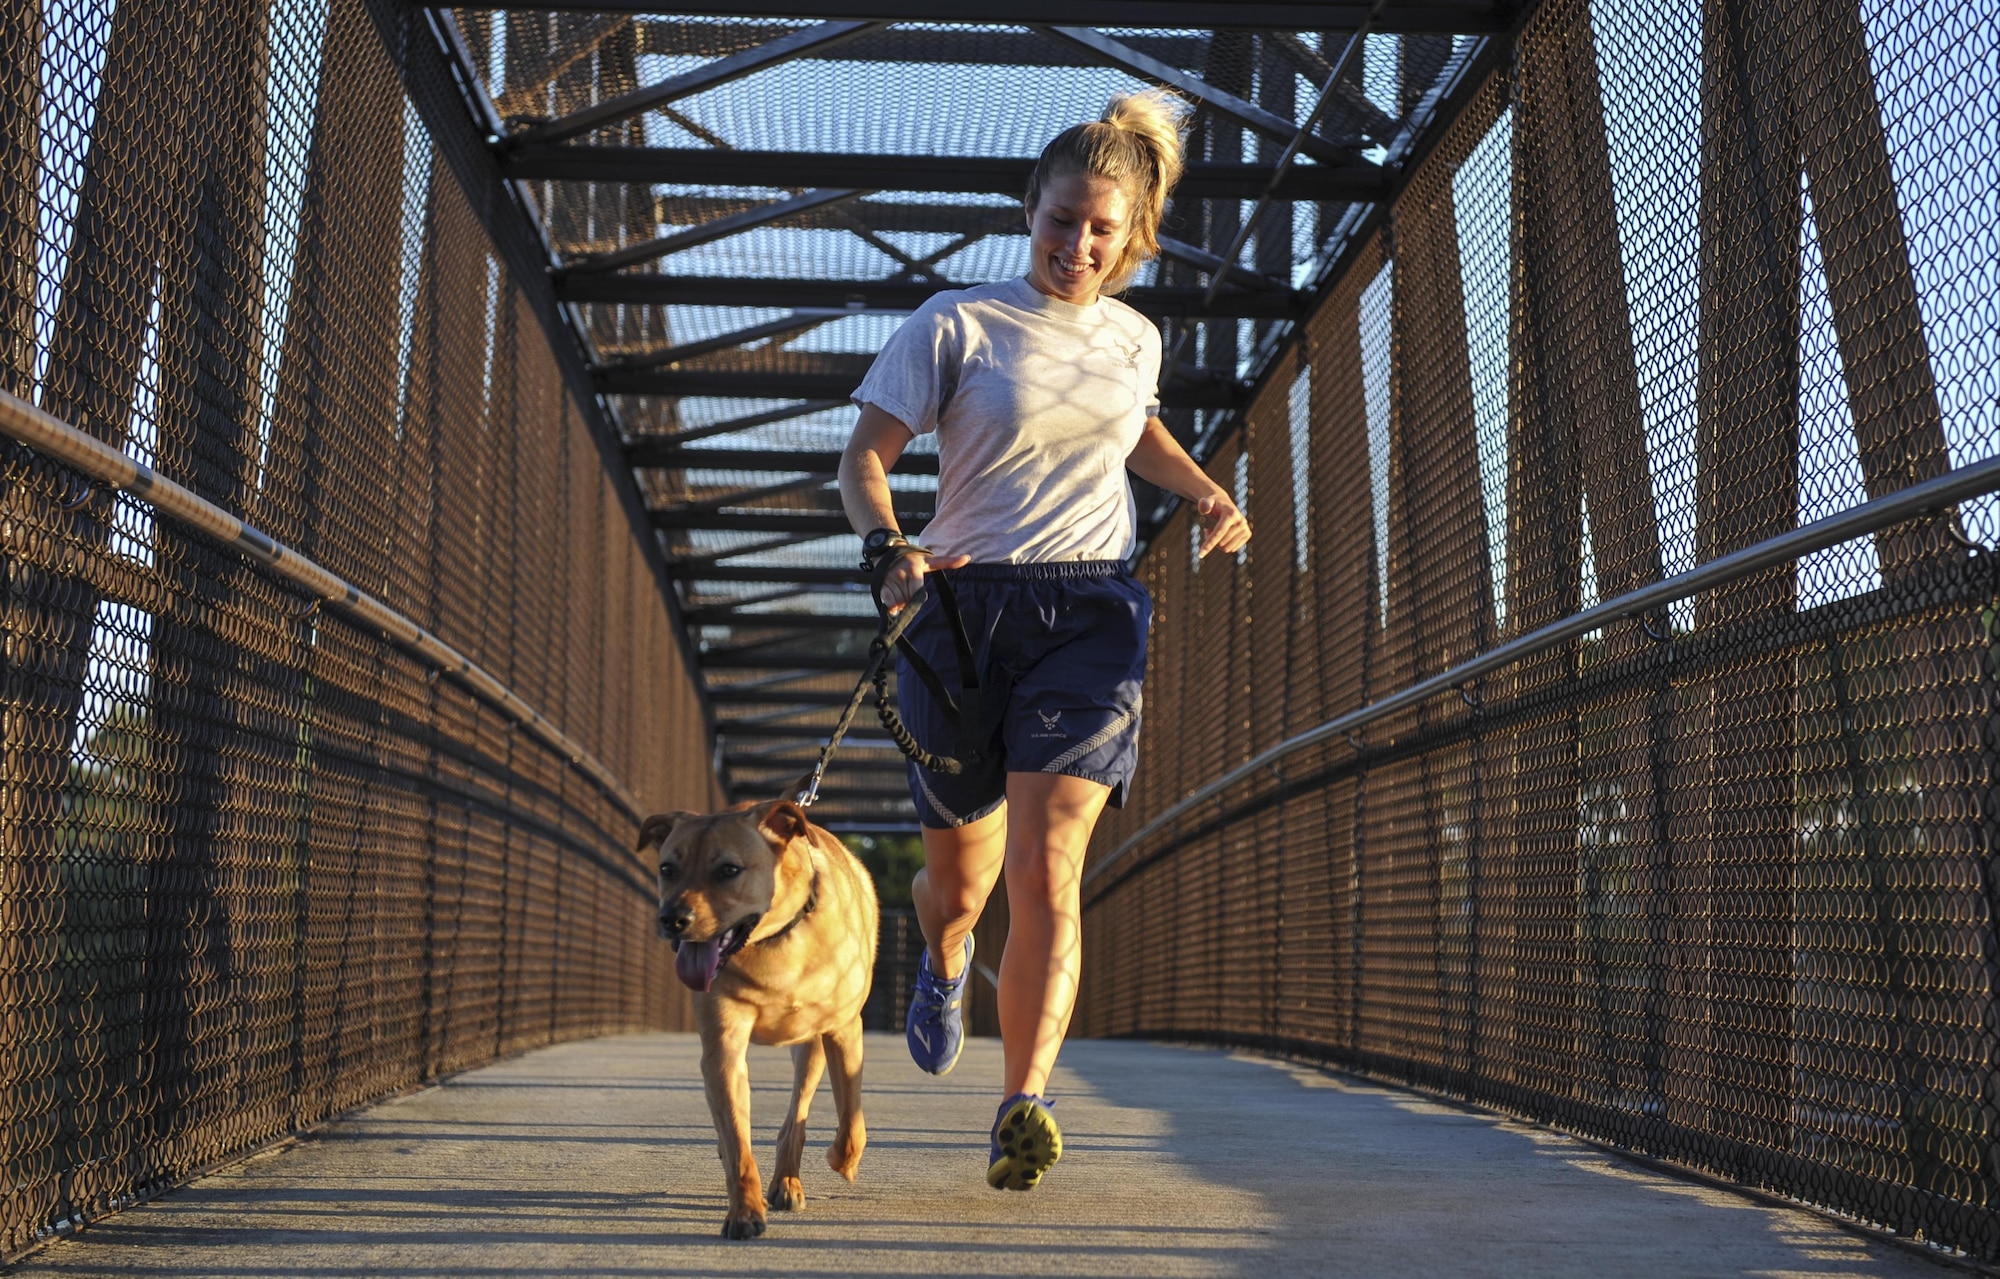 Senior Airman Rebecca Chamberlain, a paralegal with the 1st Special Operations Wing Legal Office, runs with her dog, Cecil, at Hurlburt Field, Fla., Aug. 30, 2016. Chamberlain often runs with Cecil as she prepares for the 20th Annual Air Force Marathon scheduled to take place Sept. 17, at Wright-Patterson Air Force Base. (U.S. Air Force photo by Airman 1st Class Joseph Pick)